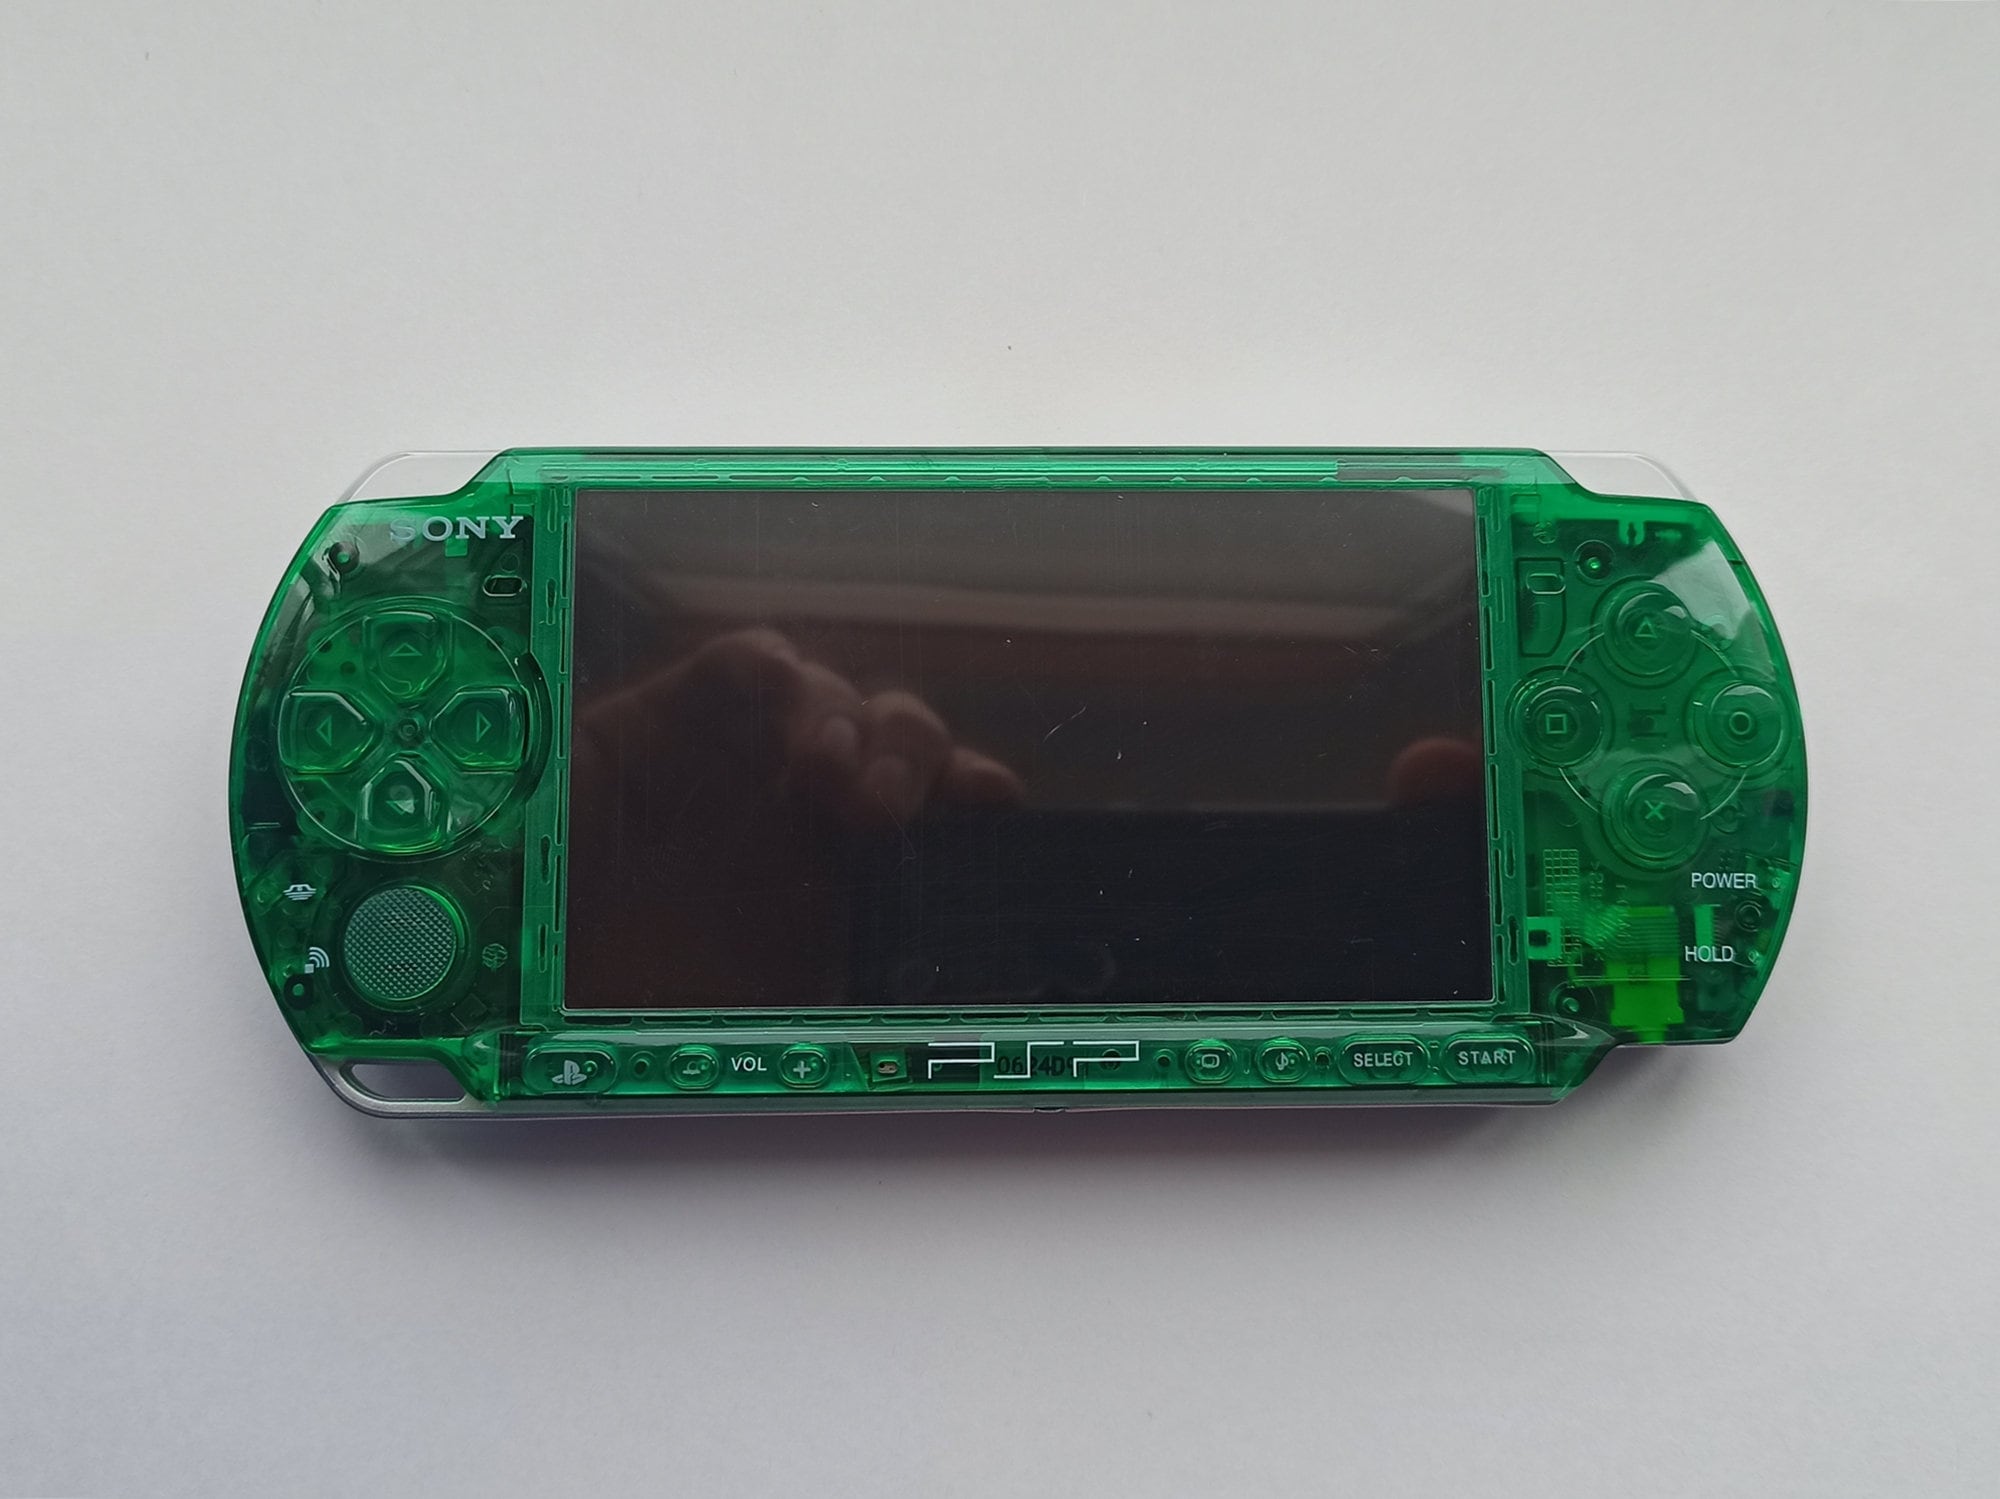 Custom PSP console modded with new clear green housing shell sony